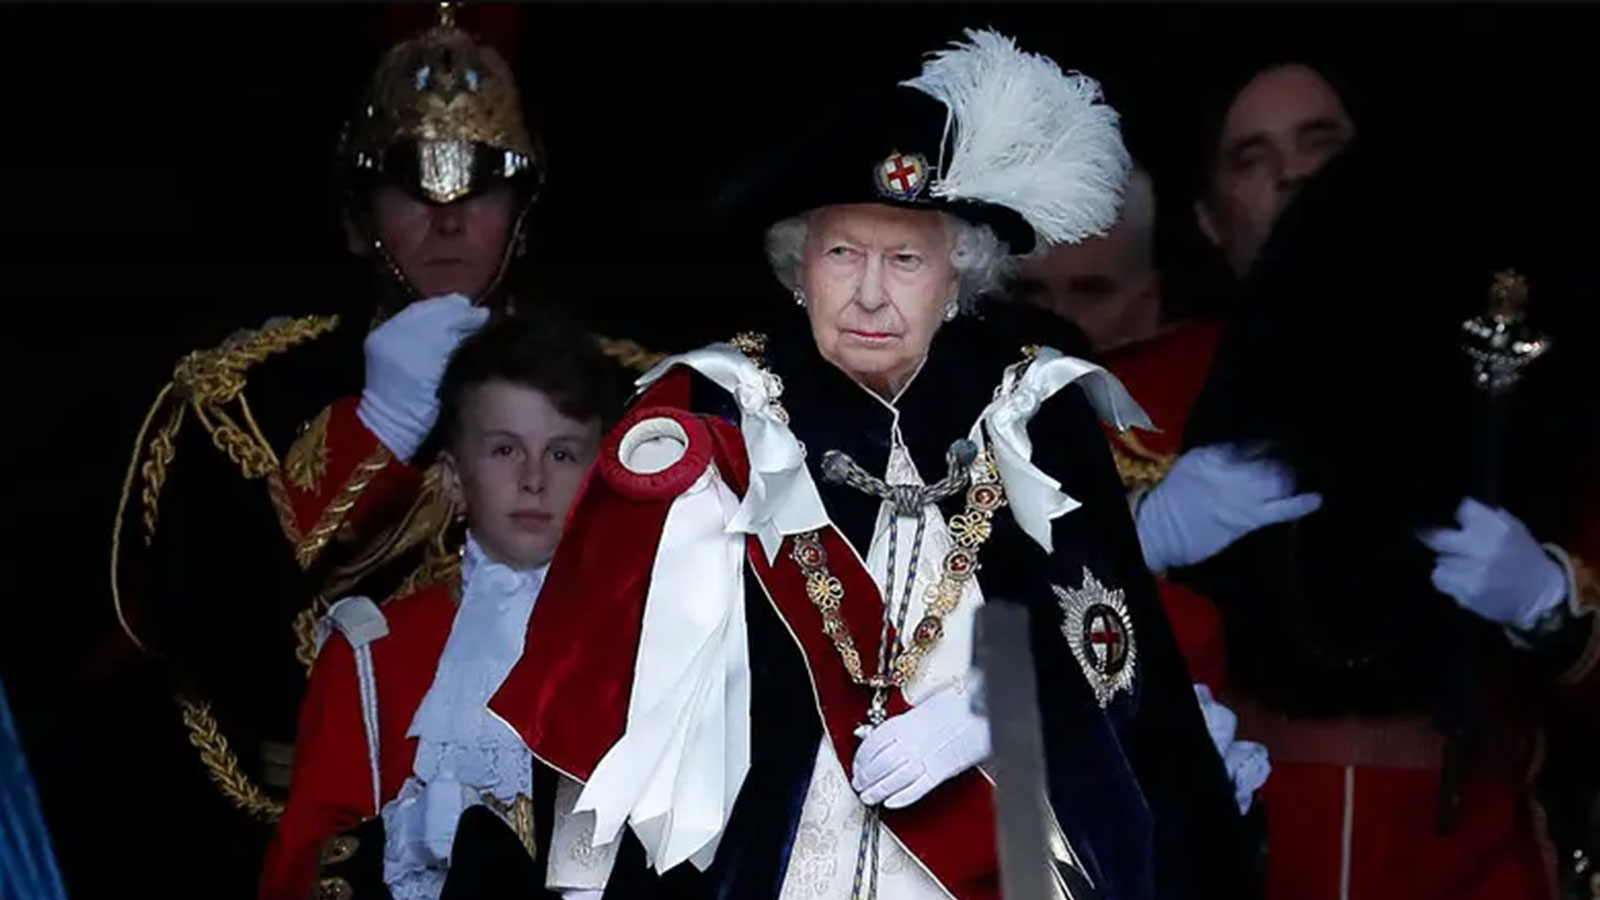 Queen Elizabeth leaves behind a radically different Britain